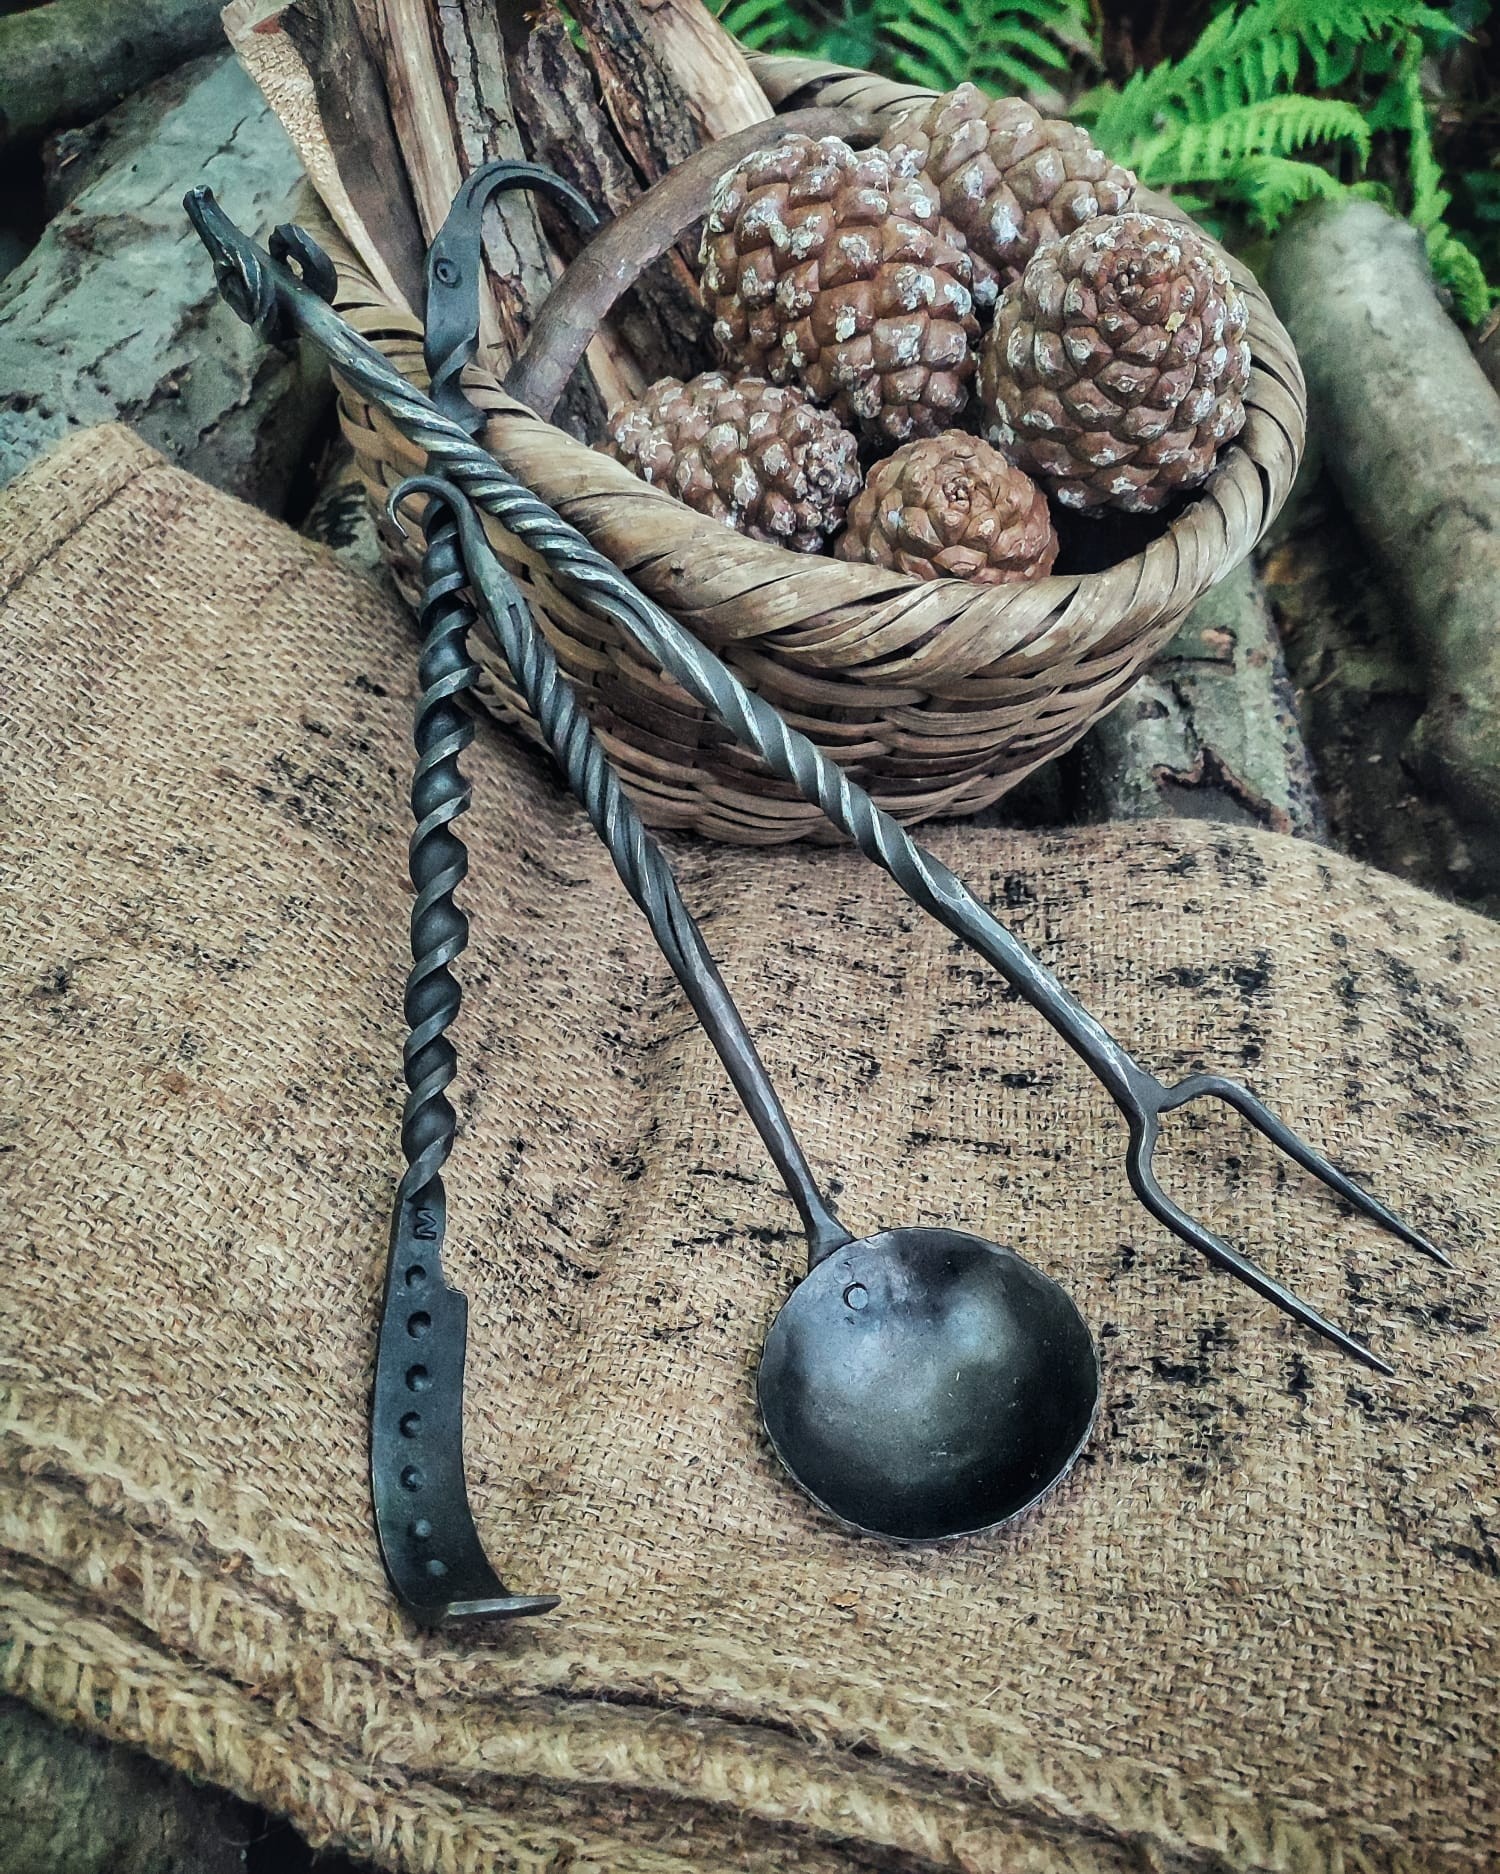 Handmade Blacksmith  Primitive Camping Gear Set Carno Steel Spoon Fire Mixer and Fork